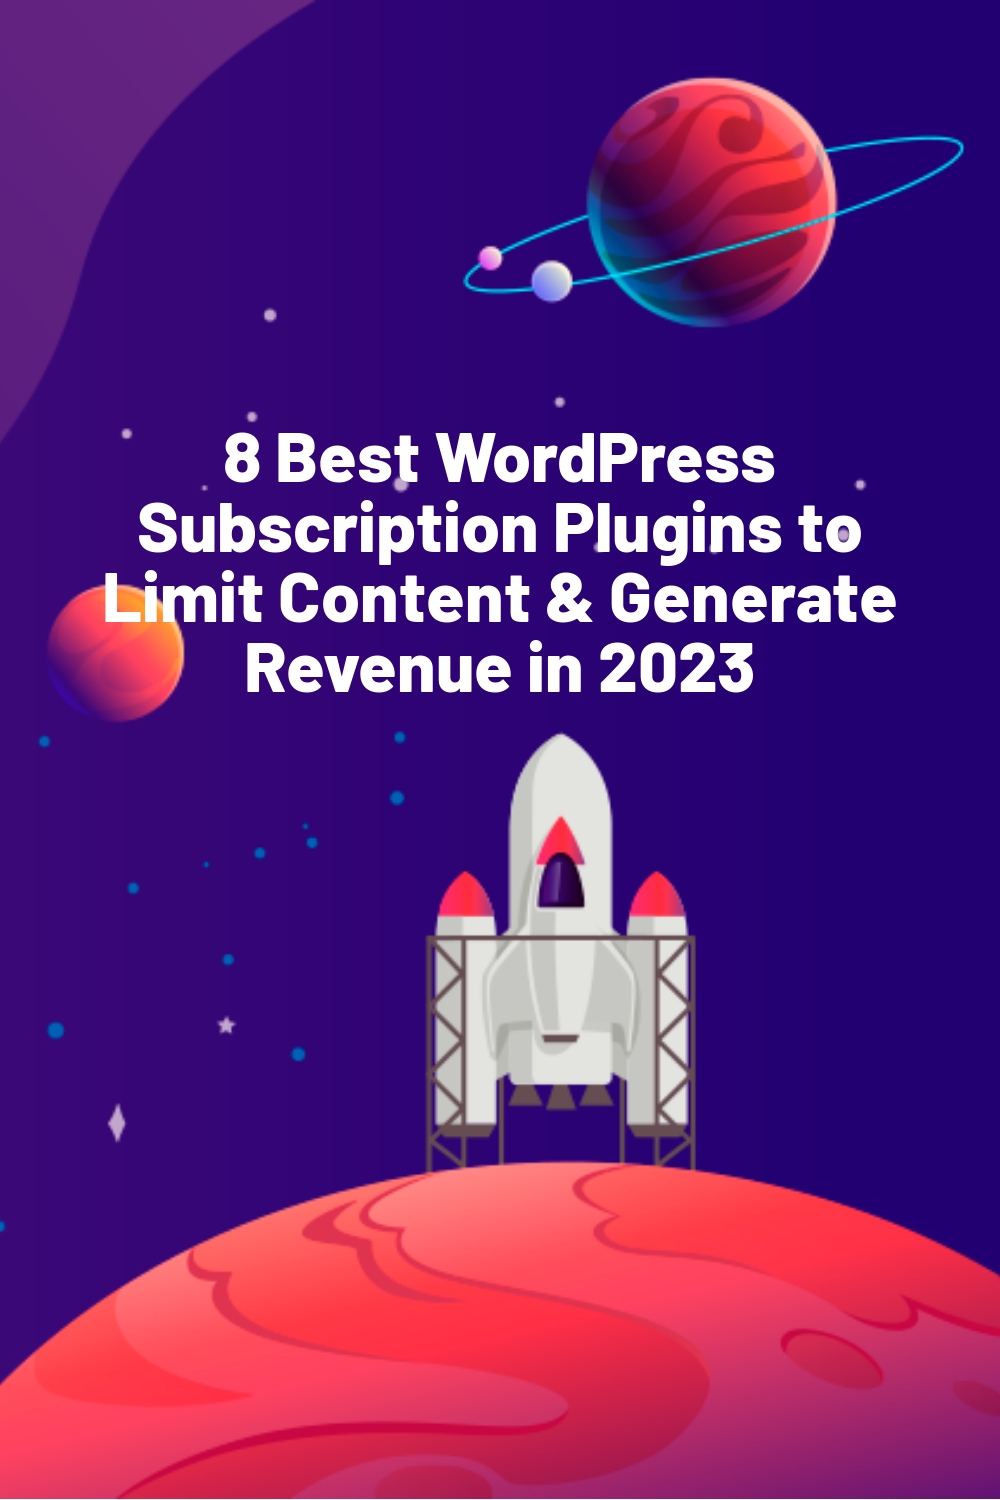 8 Best WordPress Subscription Plugins to Limit Content & Generate Revenue in 2023